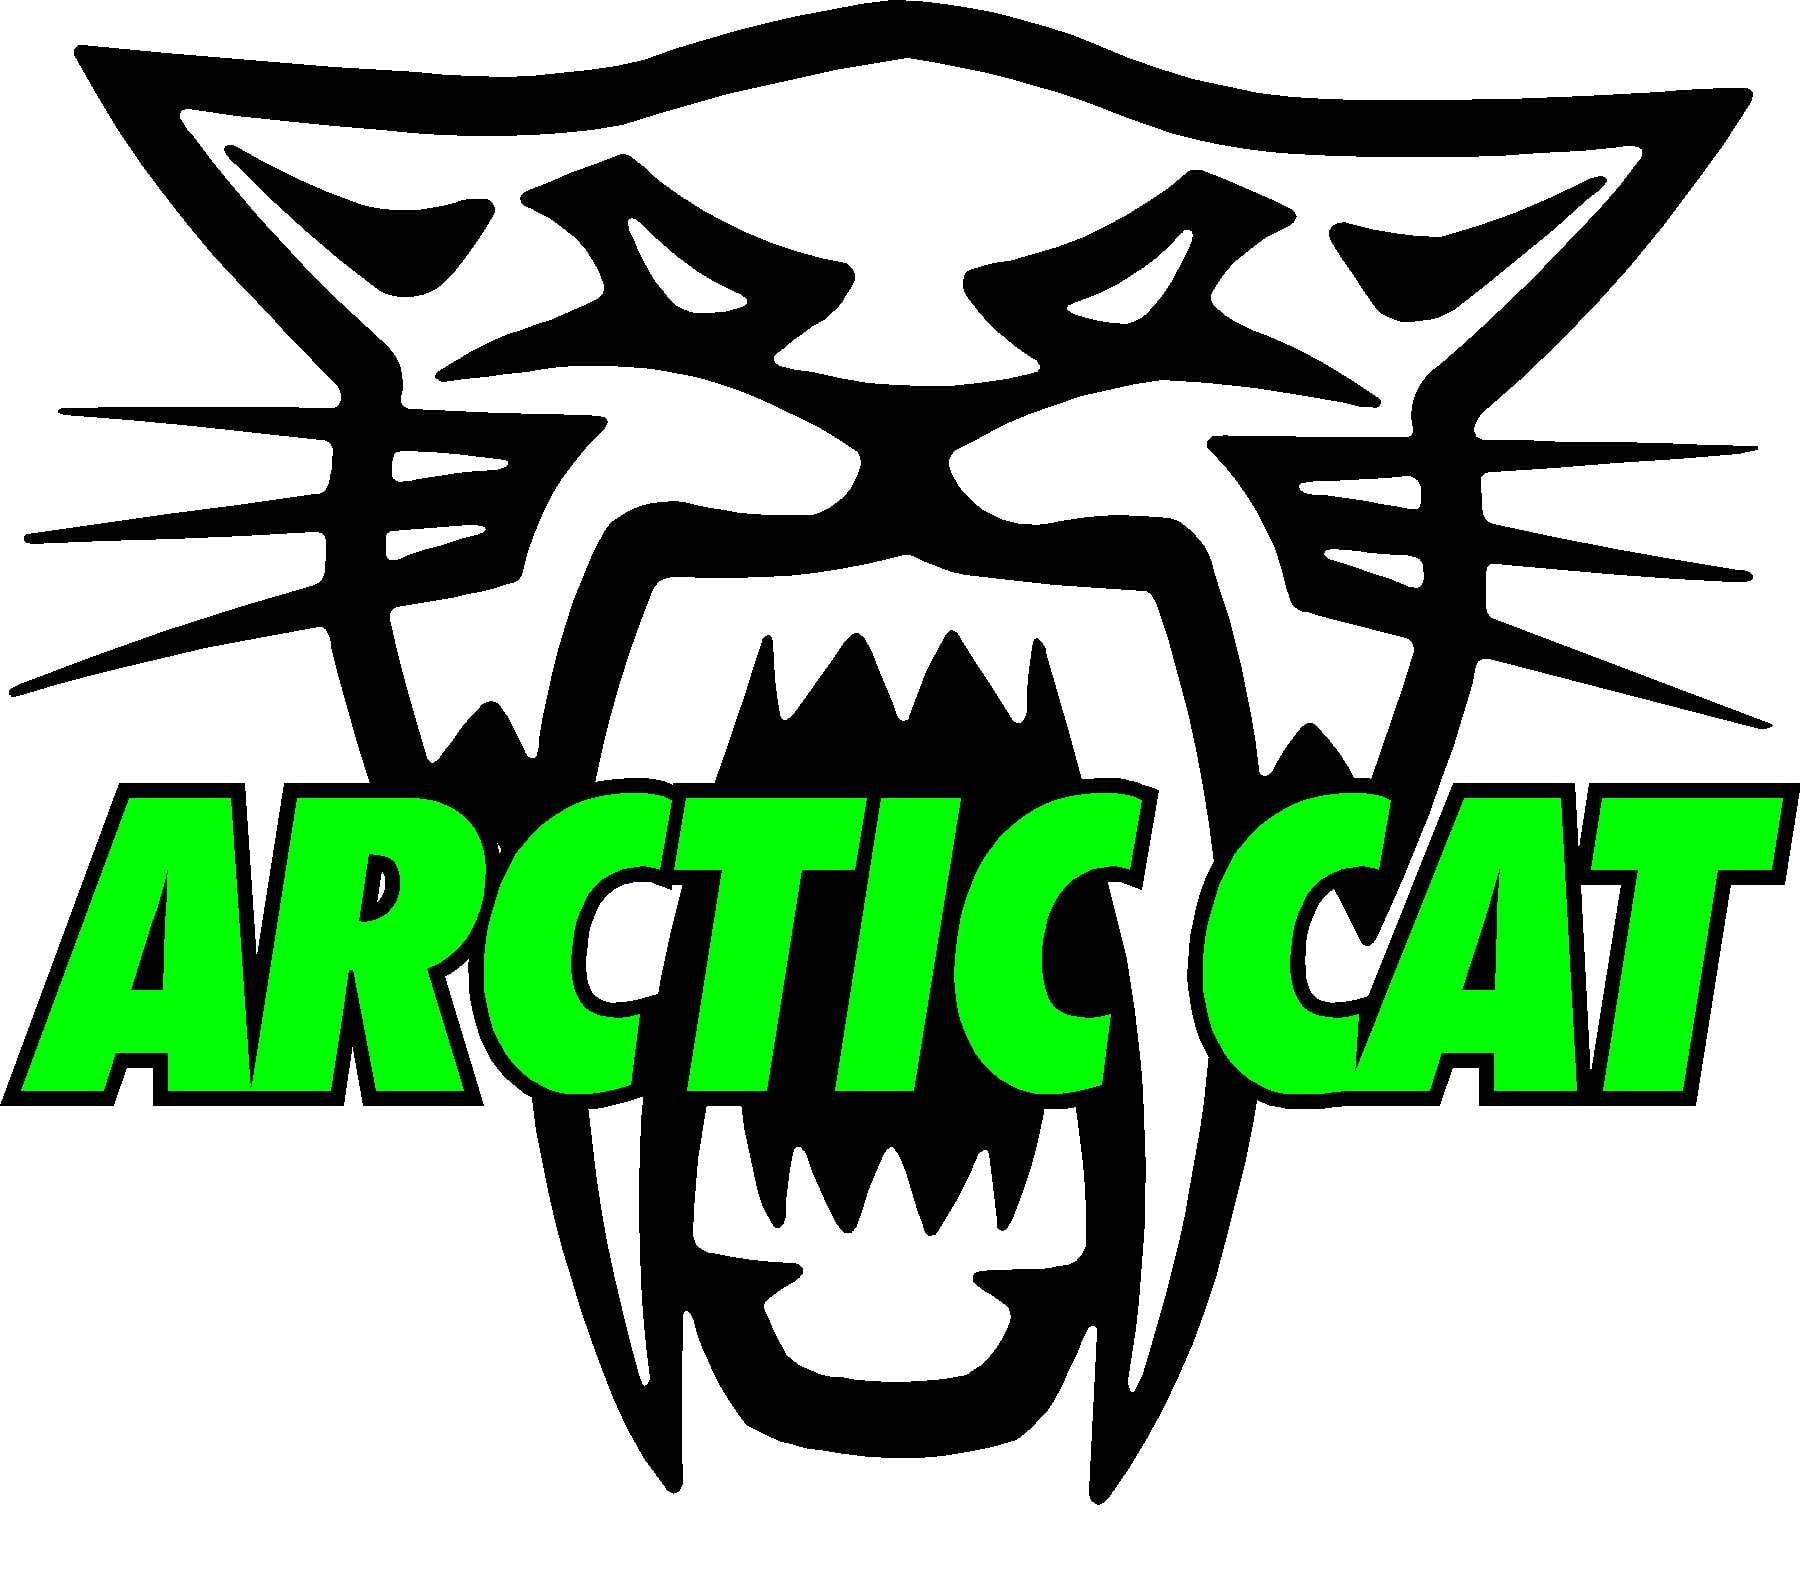 2 ARCTIC CAT Racing 40" Vinyl Decal Graphics for Truck Snowmobile Sled Trailer 